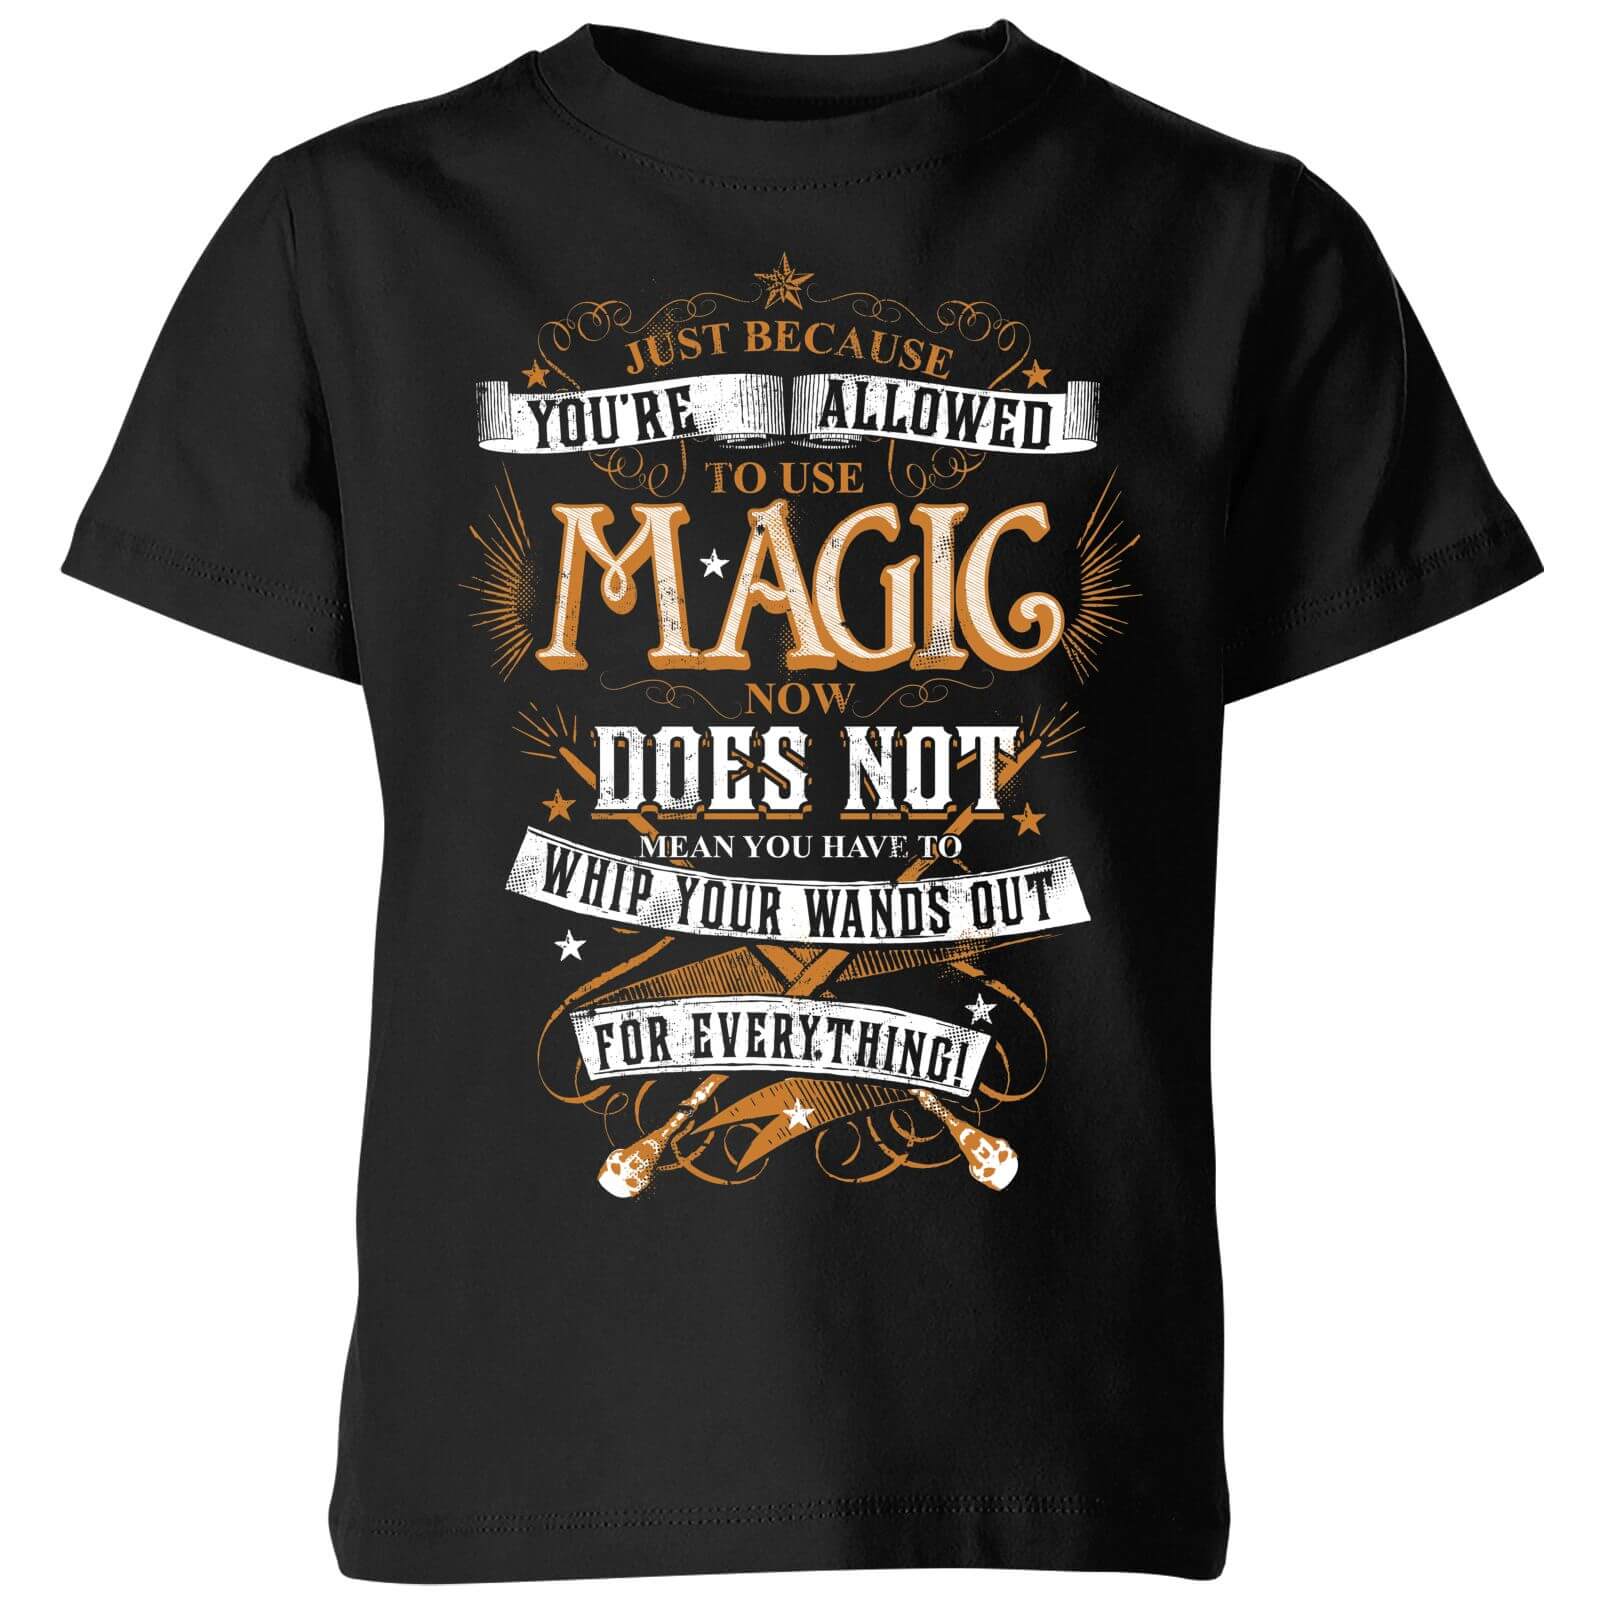 Harry Potter Whip Your Wands Out Kids' T-Shirt - Black - 7-8 Years - Black